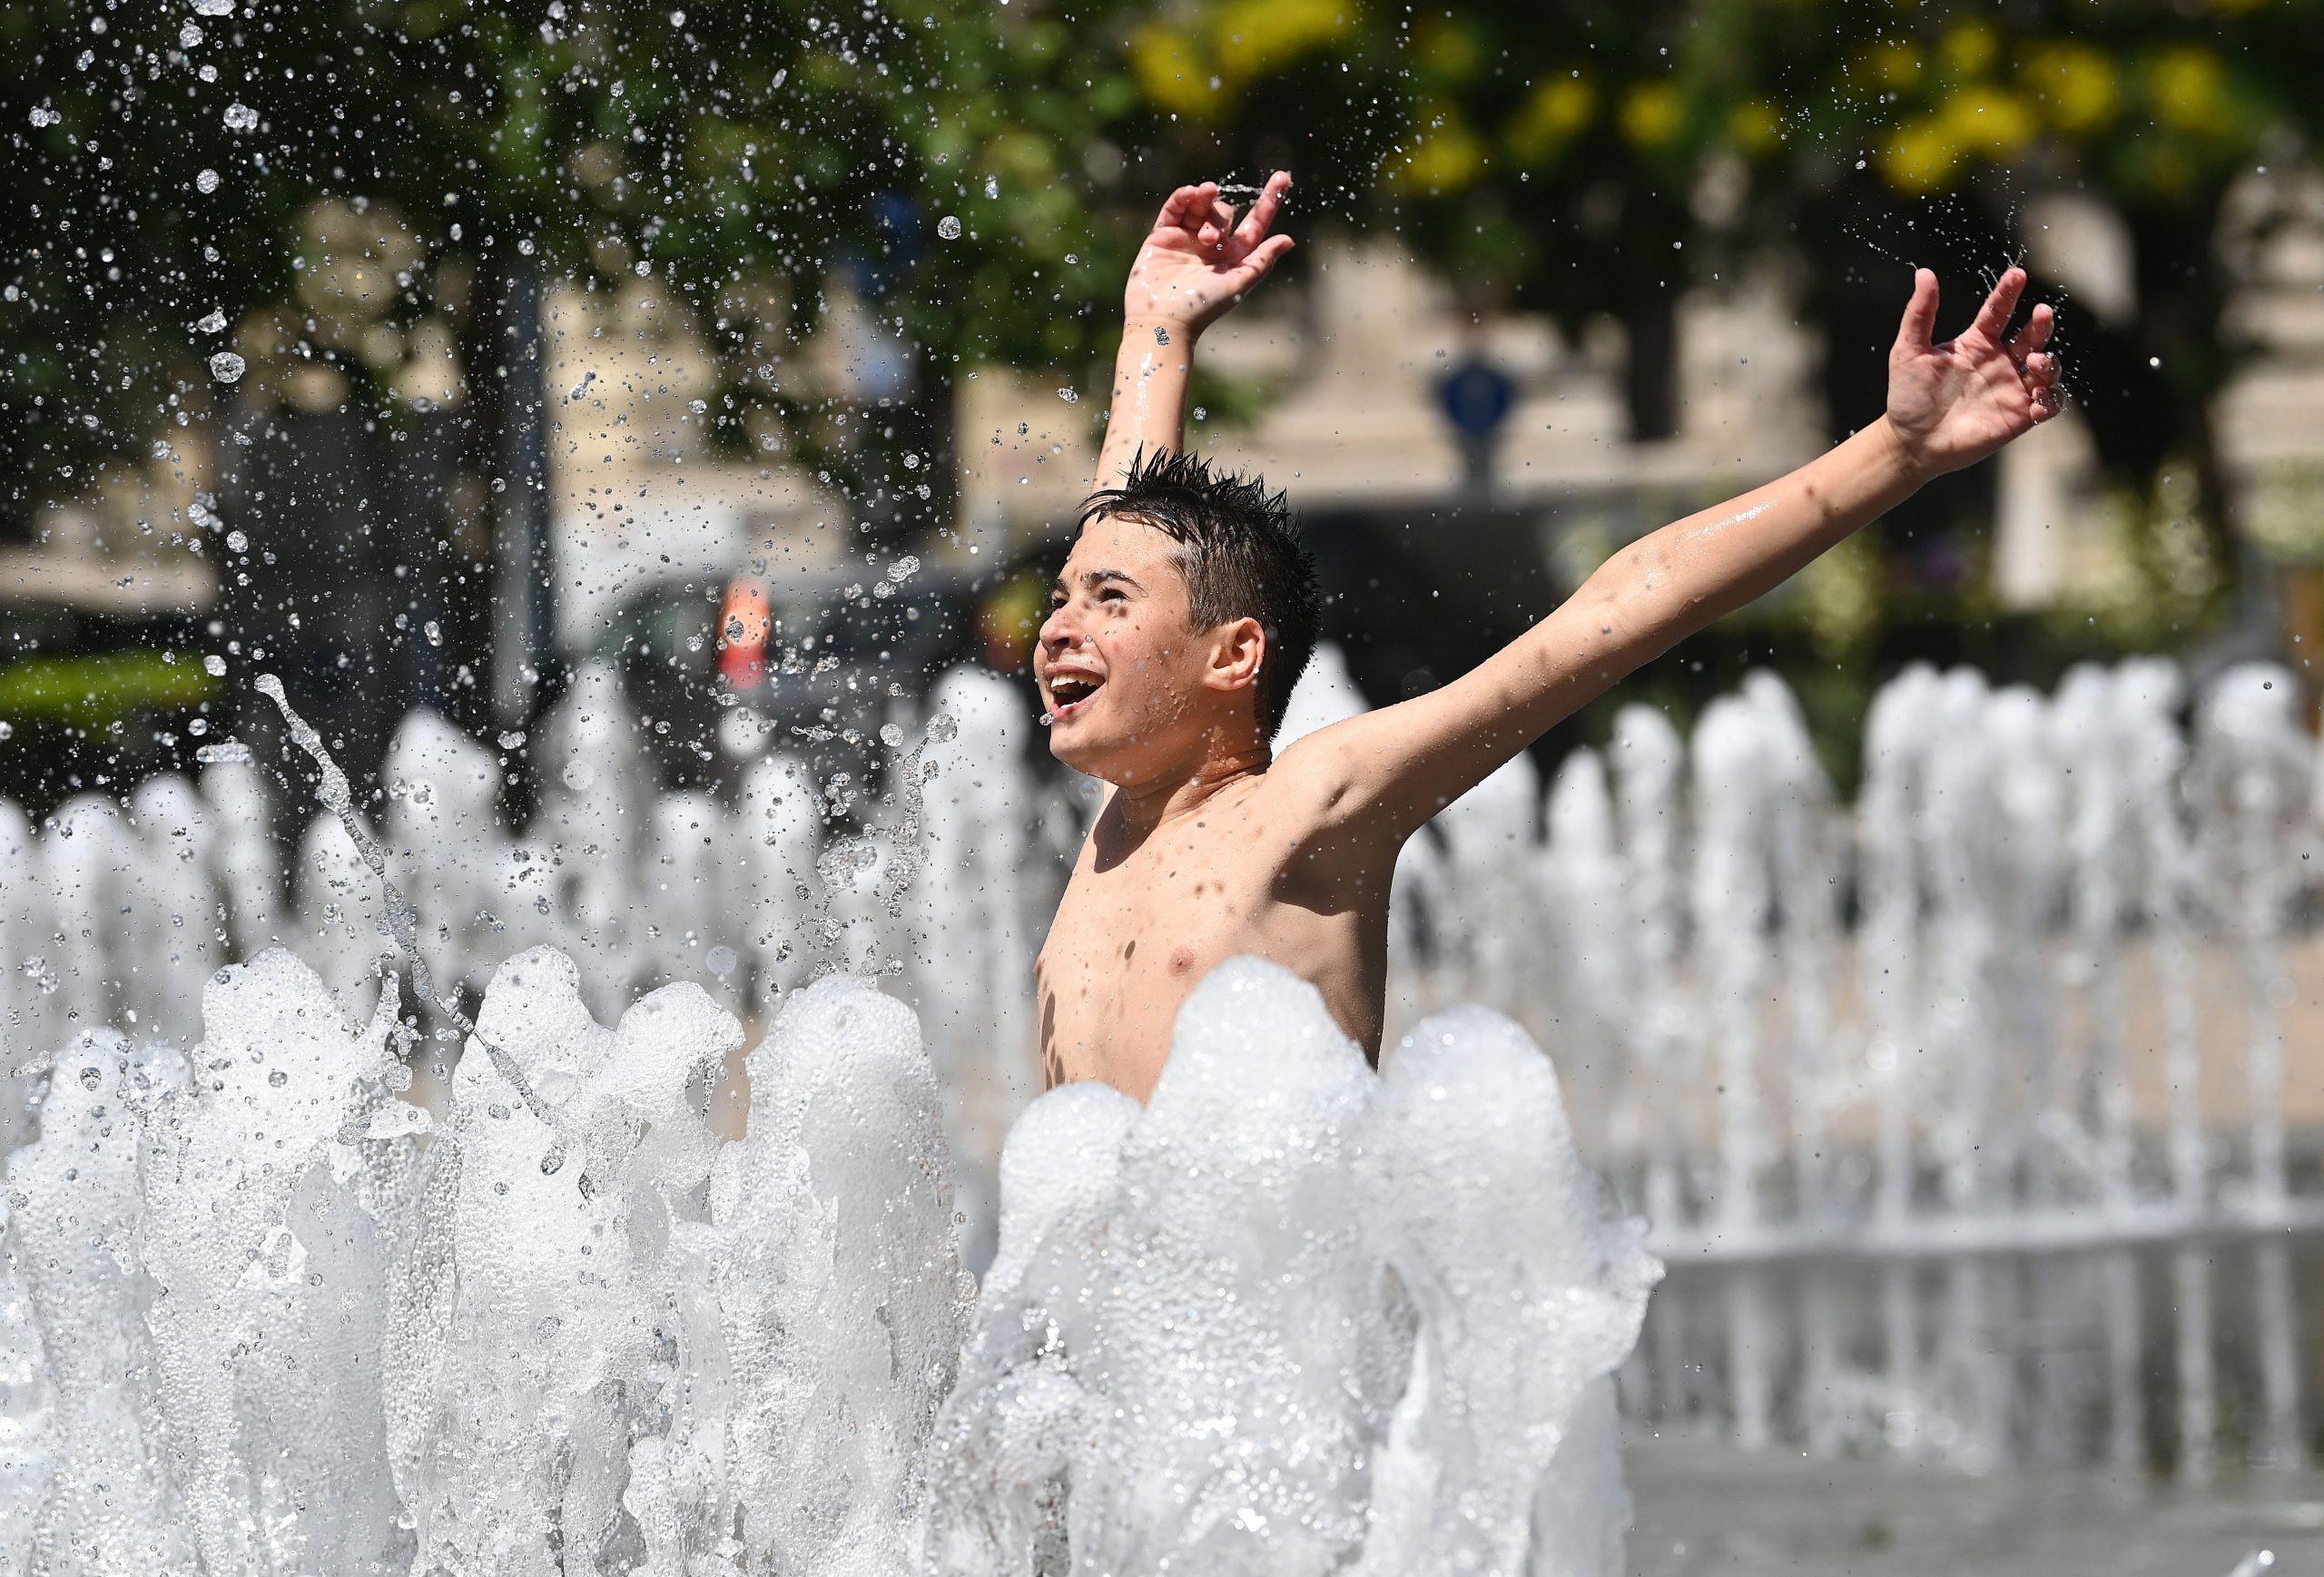 New National Daily Heat Record of 37.8 Degrees Set in Hungary